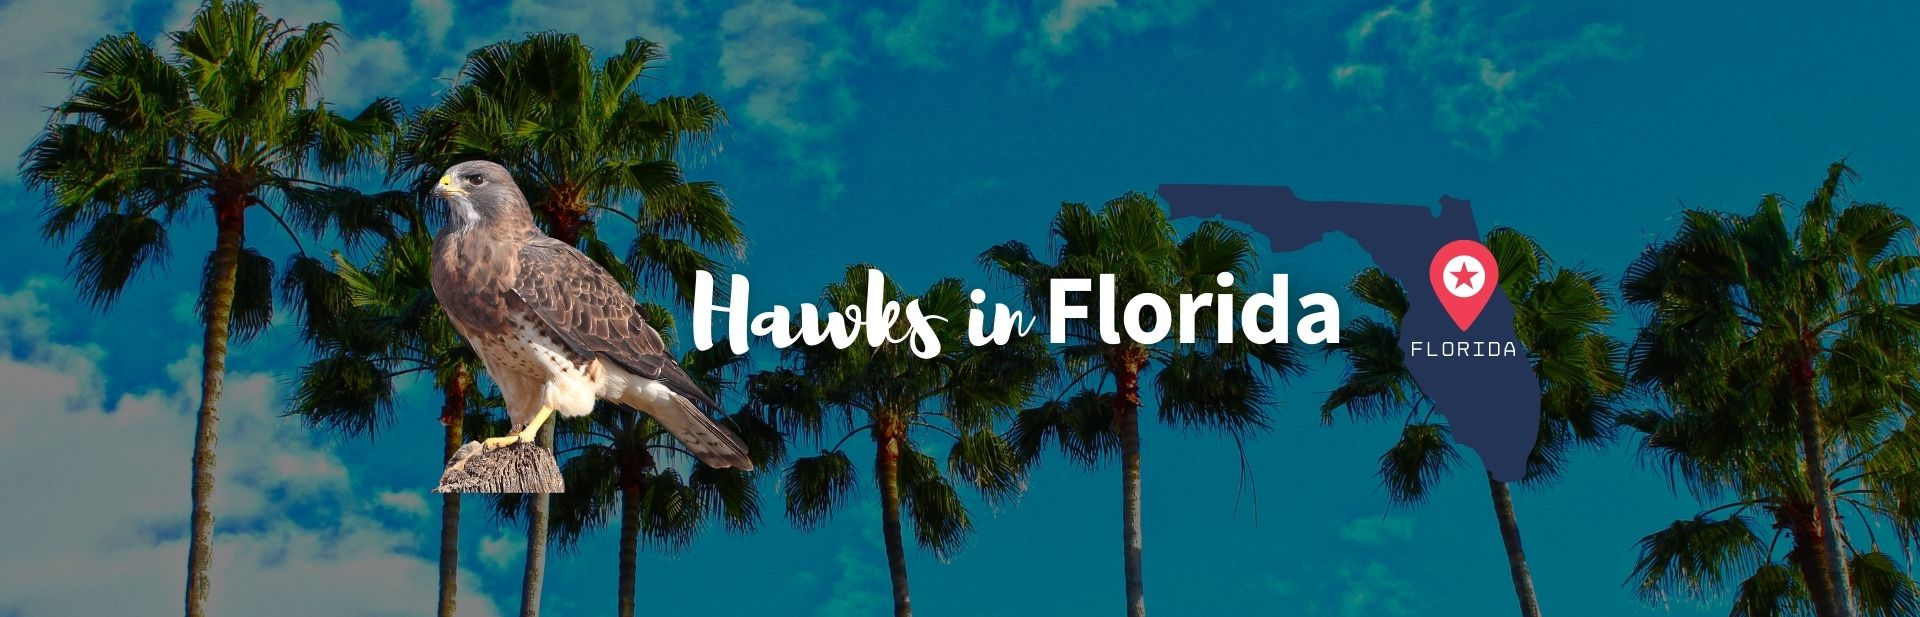 The 13 Species of Hawks in Florida (Chart and Pictures)